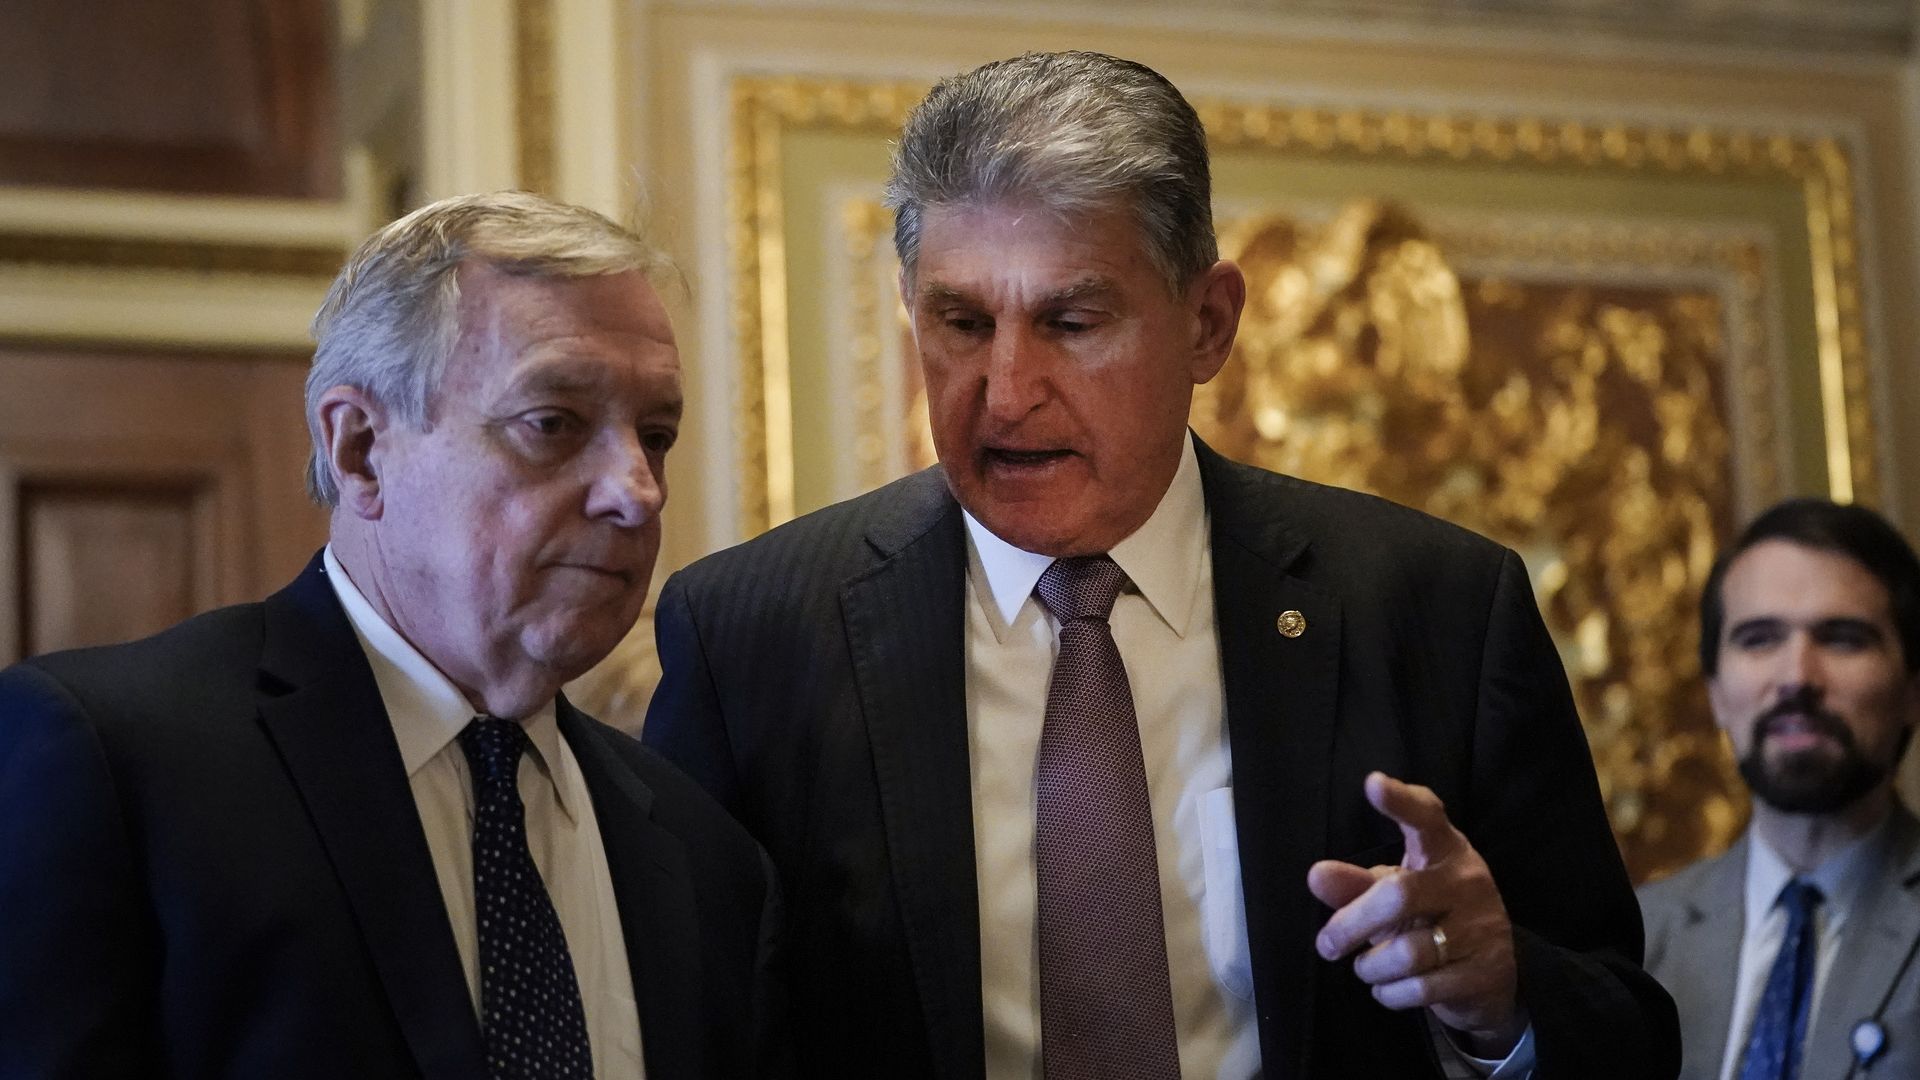 Sens. Dick Durbin and Joe Manchin, both wearing gray suits and white shirts, in the Senate side of the Capitol.